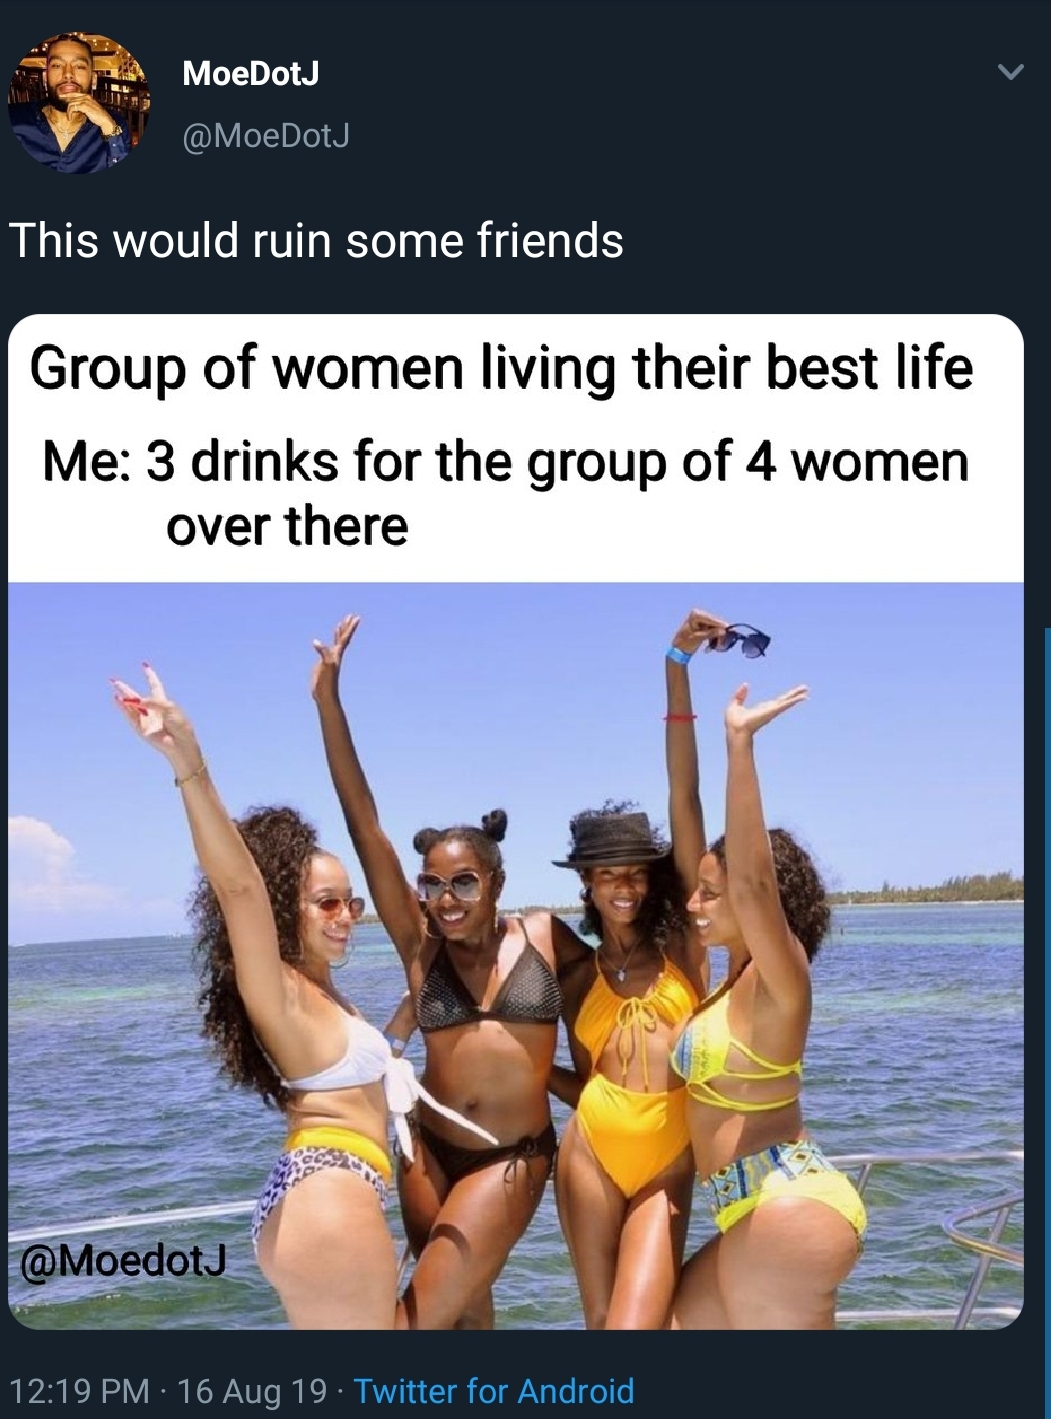 friendship - MoeDoty This would ruin some friends Group of women living their best life Me 3 drinks for the group of 4 women over there 16 Aug 19 Twitter for Android